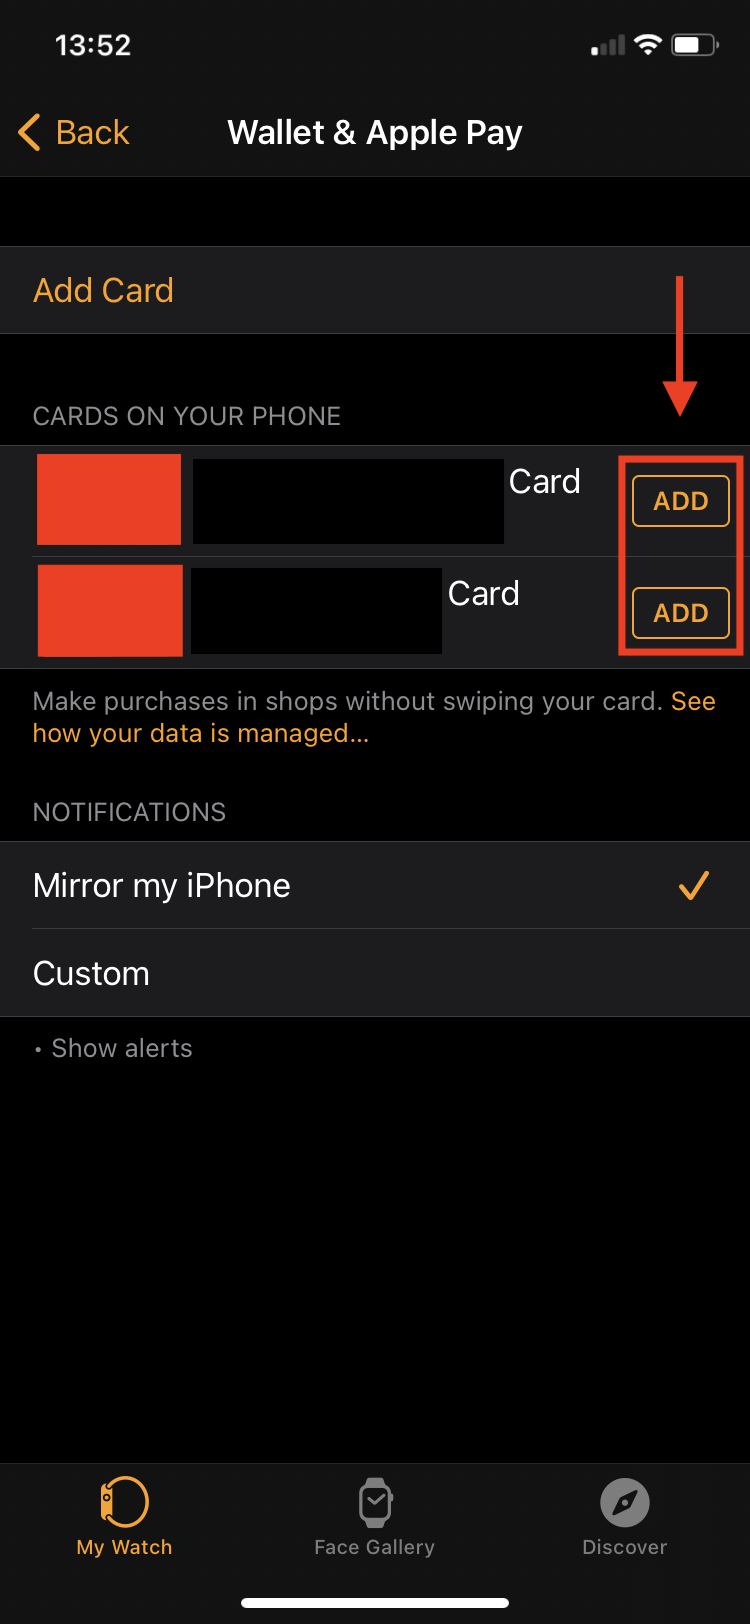 How to use Apple Pay on Apple Watch - add card